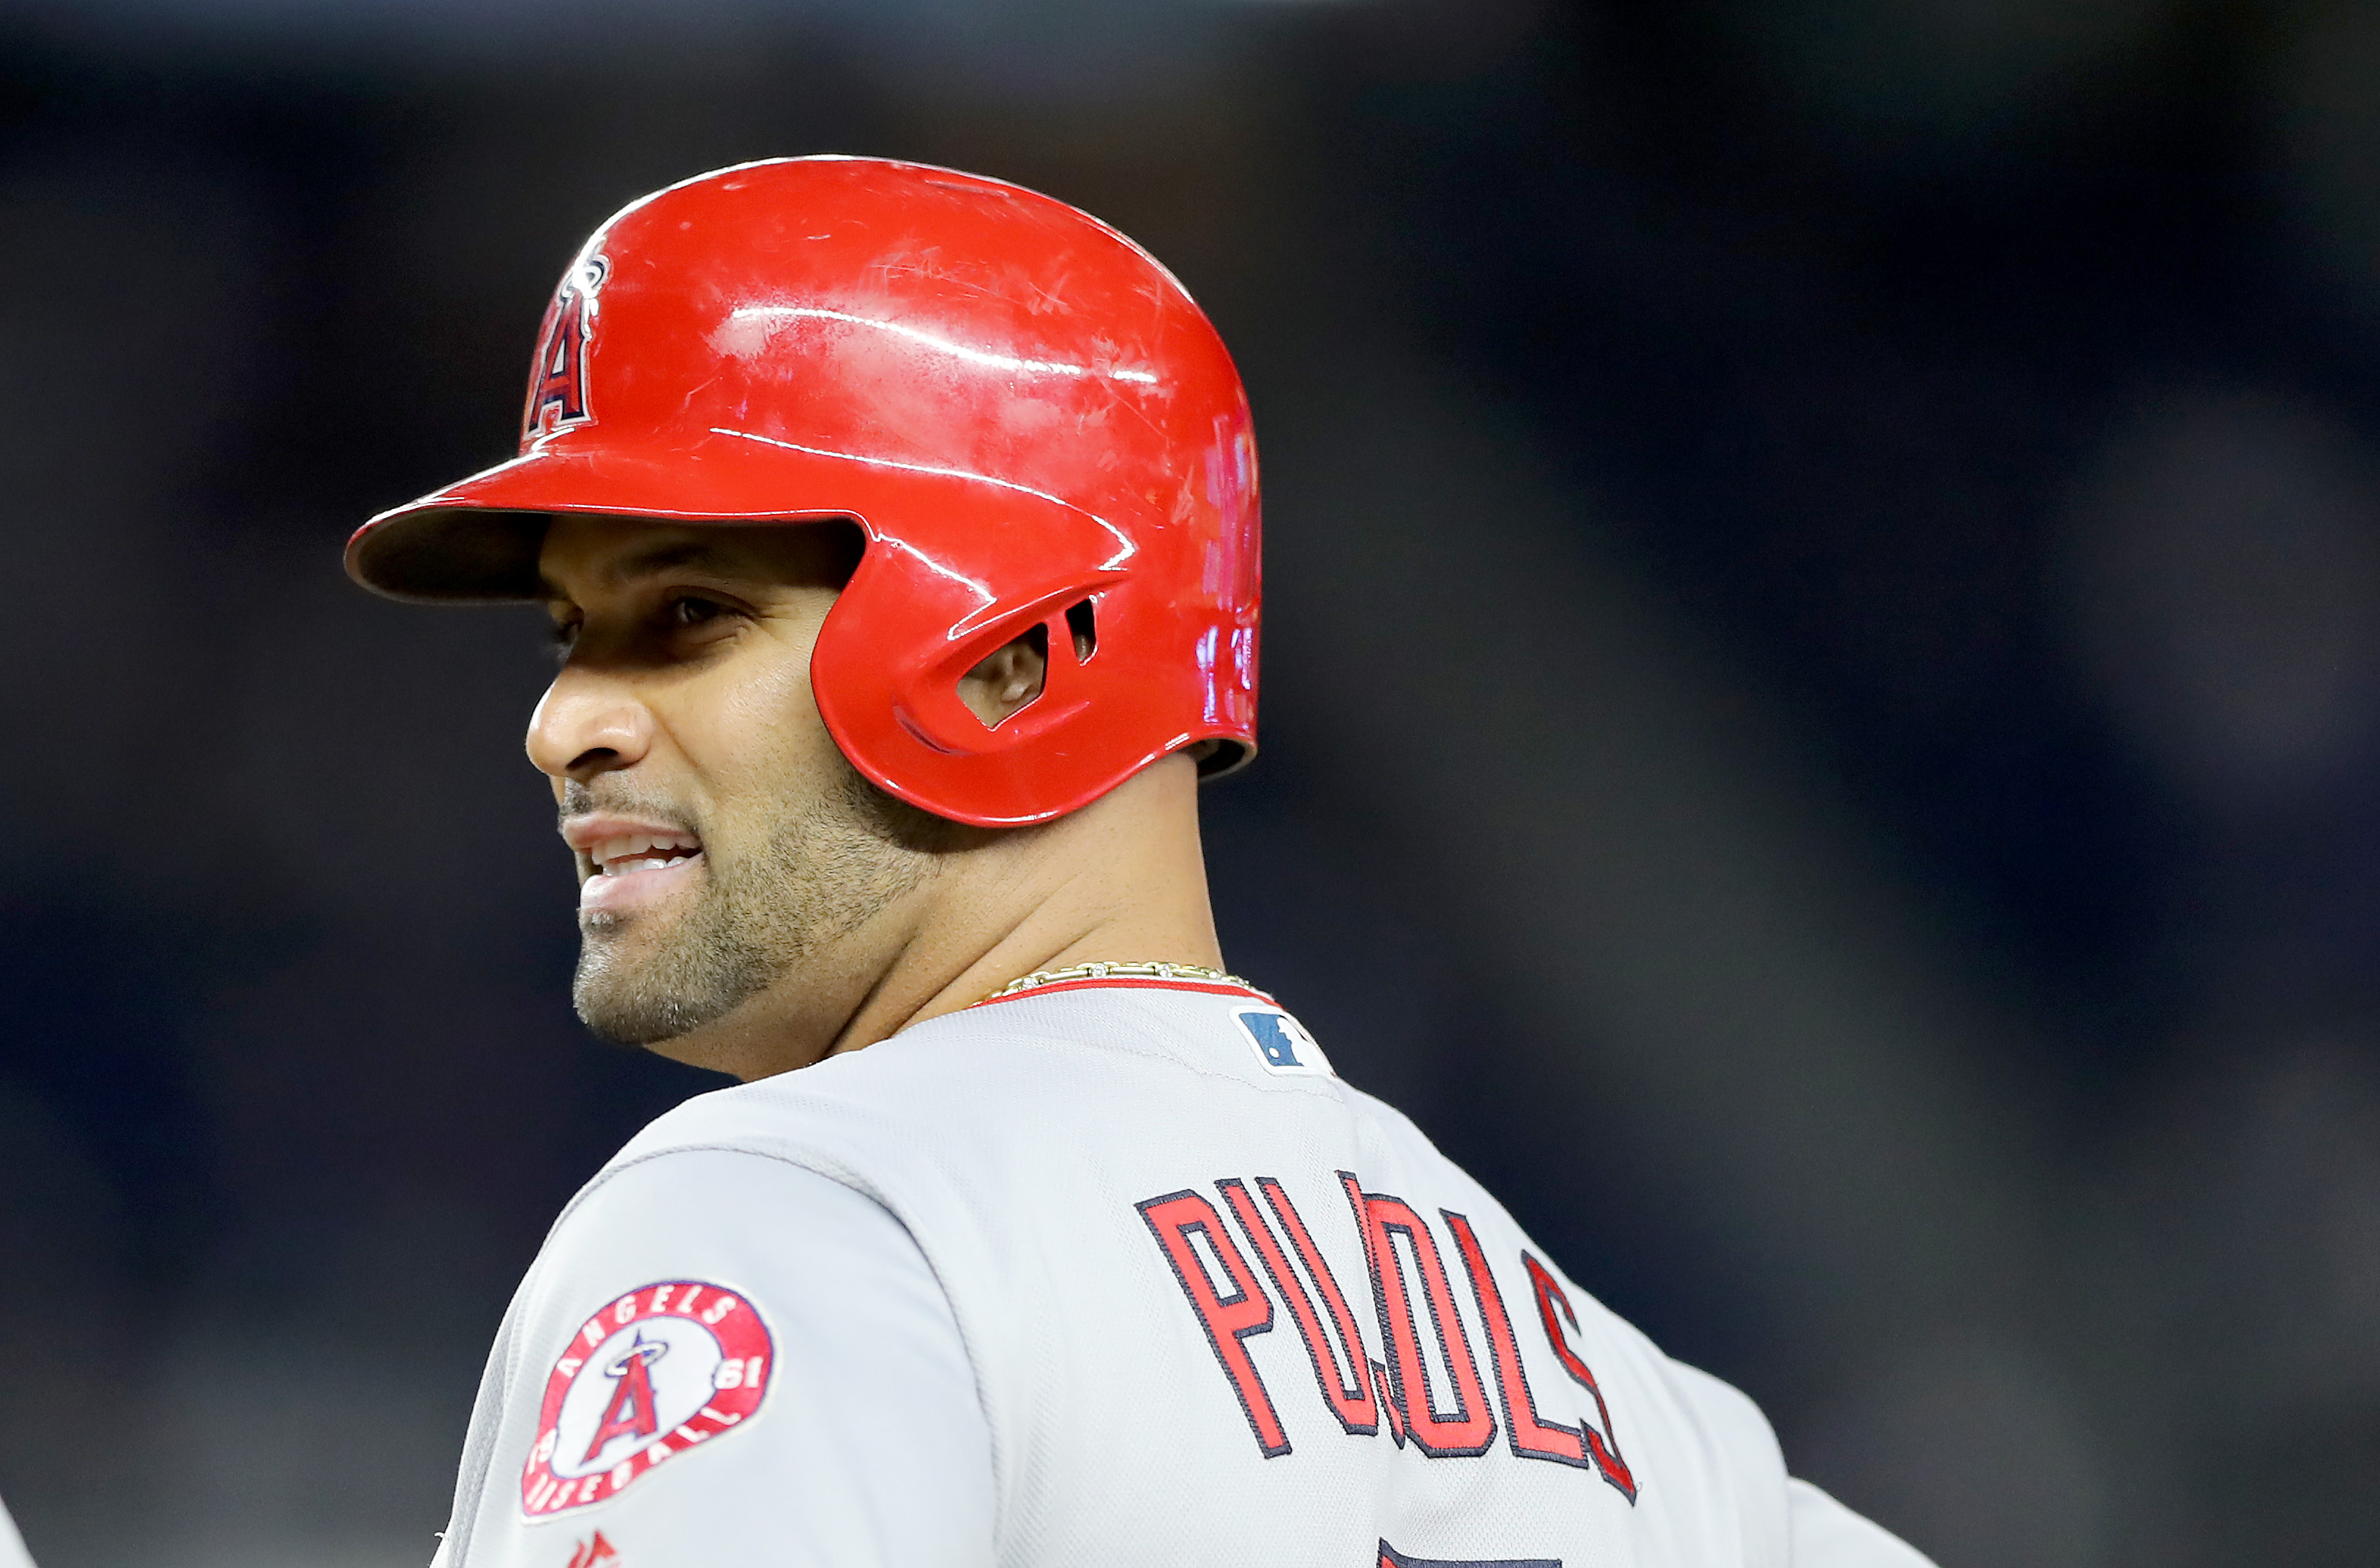 This might be the most incredible stat of Albert Pujols' career